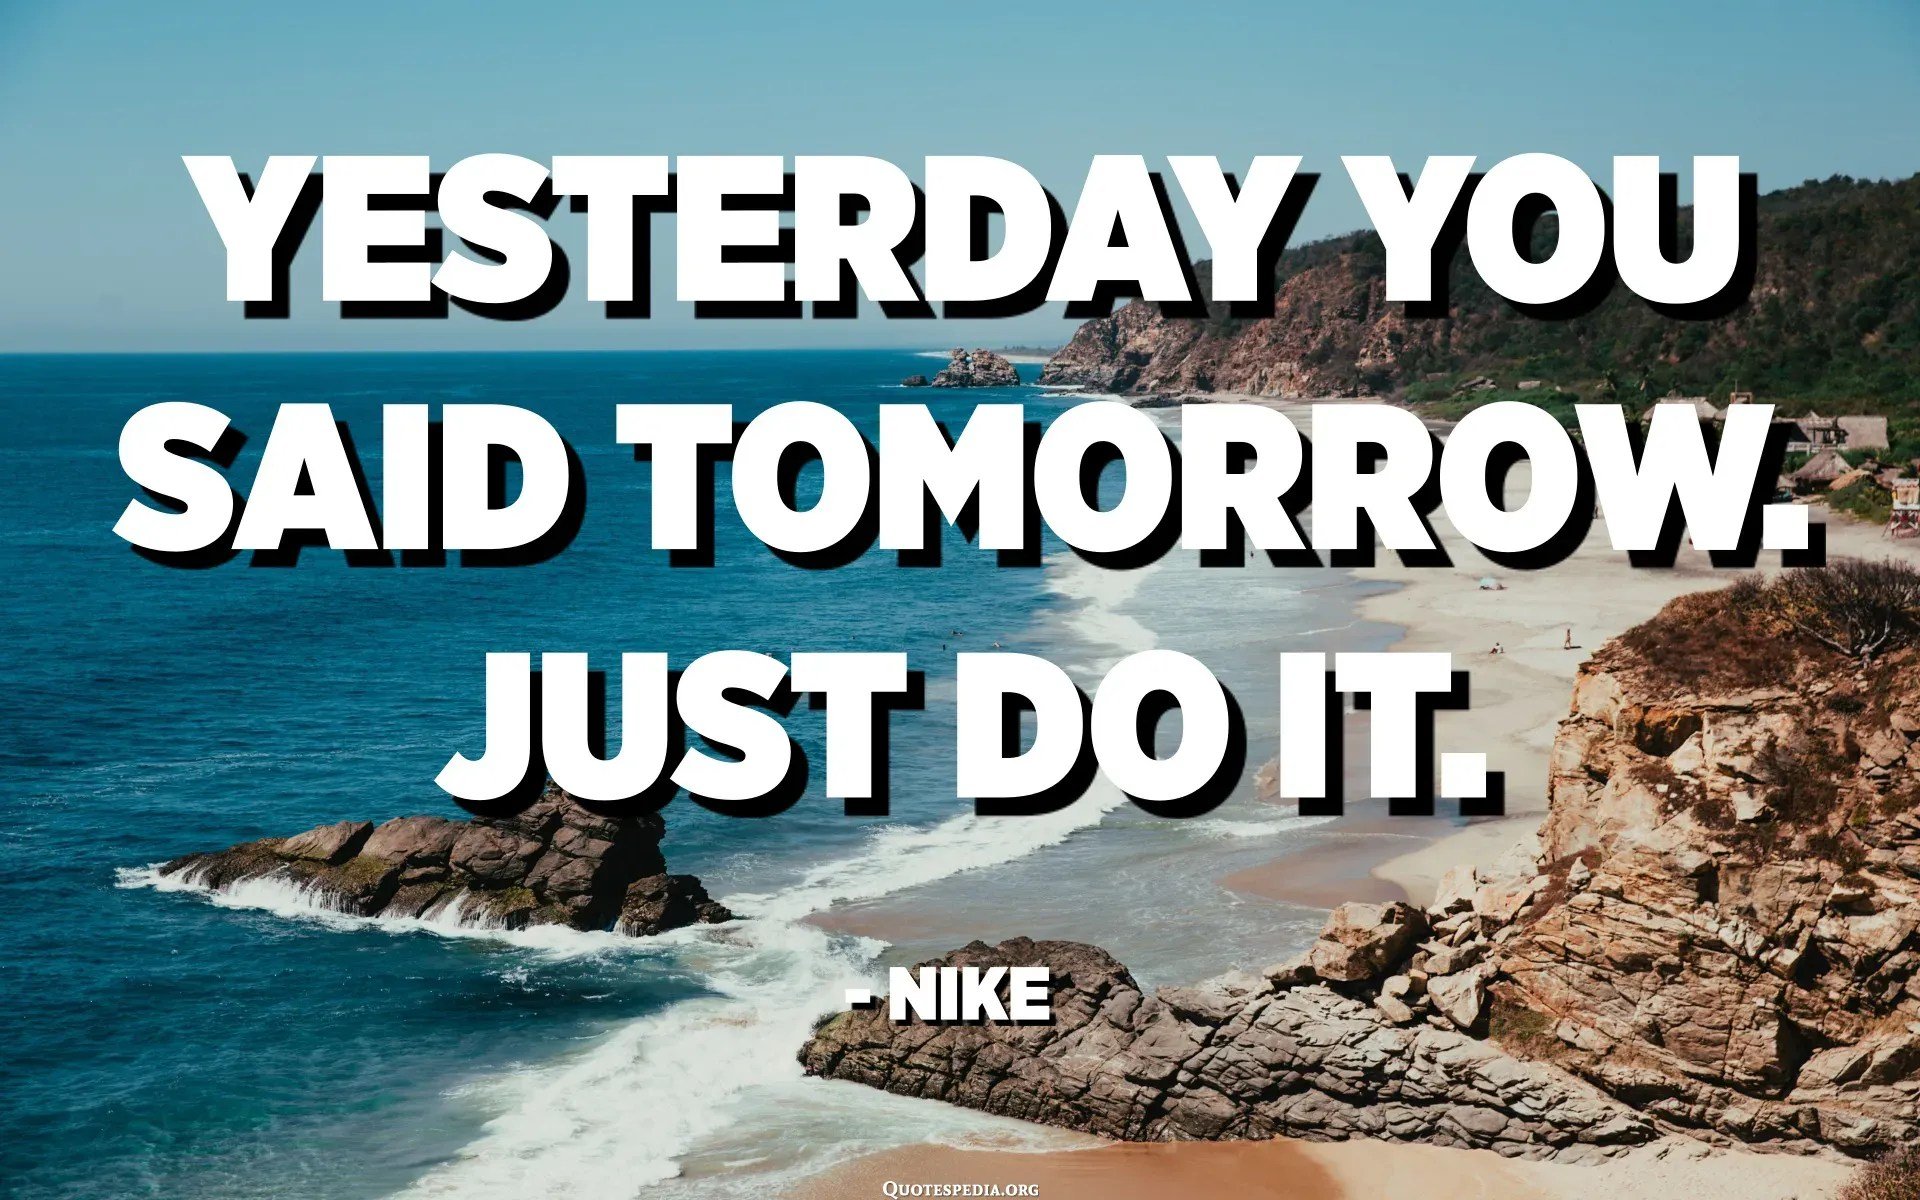 Yesterday you said tomorrow. Just do it